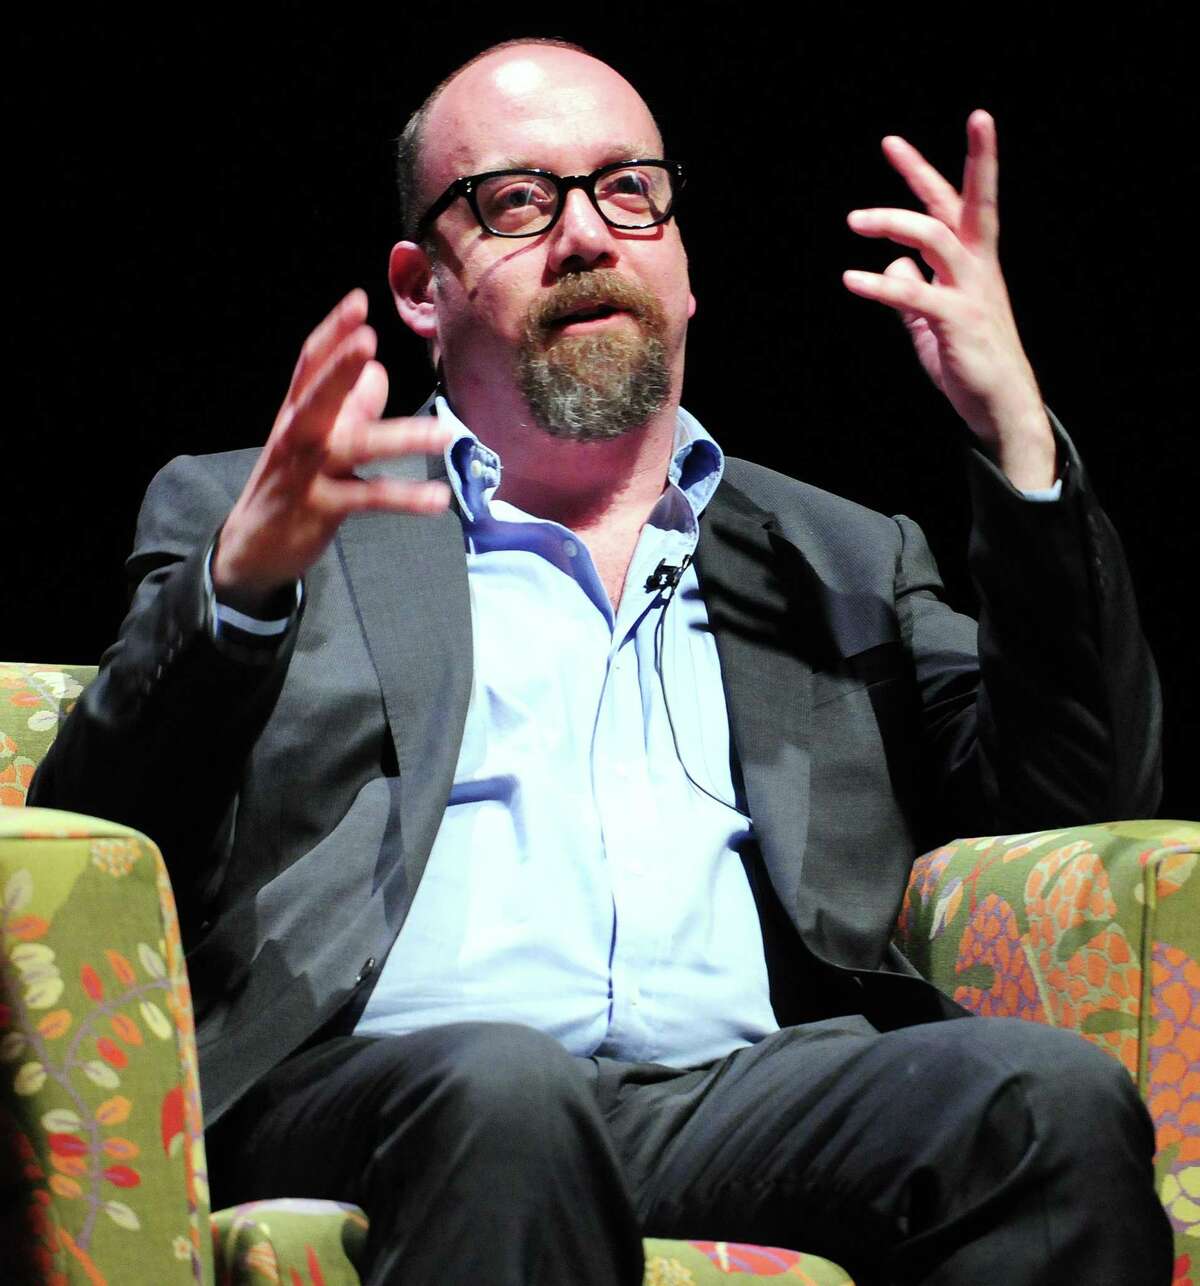 Actor Paul Giamatti answers questions on stage at Yale's University Theatre in New Haven on 4/26/2011. Photo by Arnold Gold/New Haven Register AG0409F